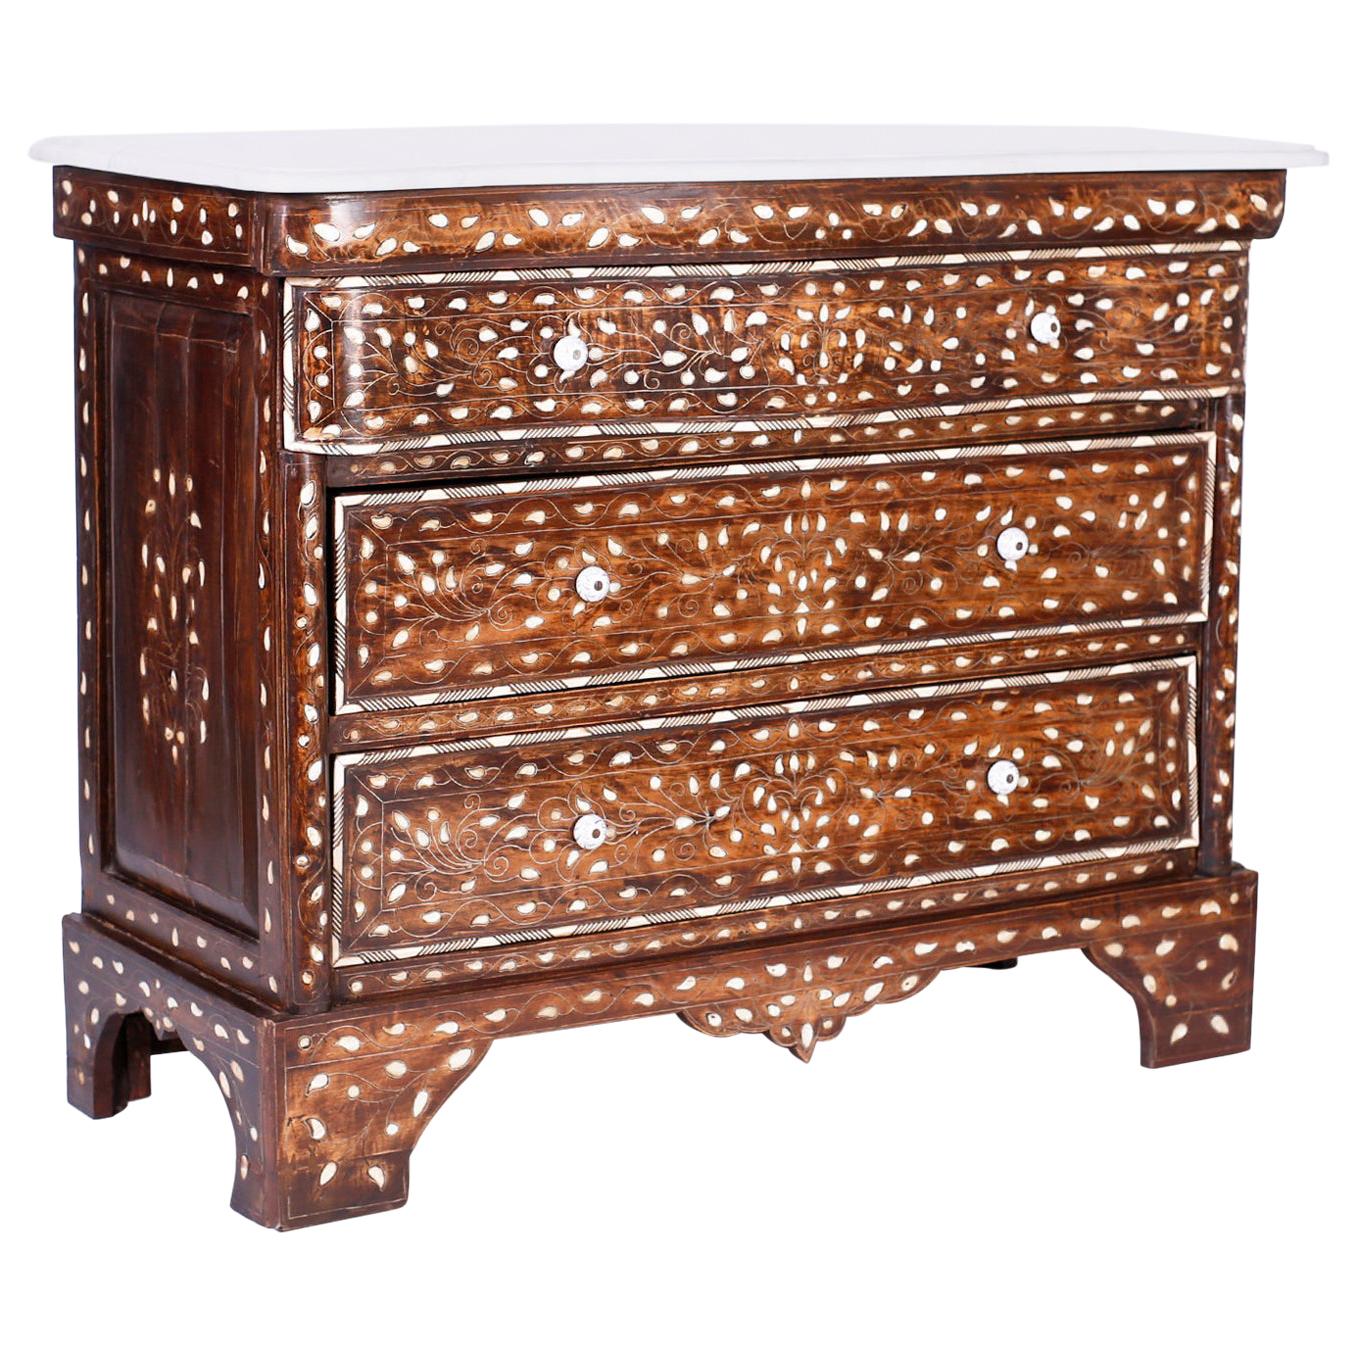 Marble Top Moorish Chest of Drawers with Inlaid Mother of Pearl